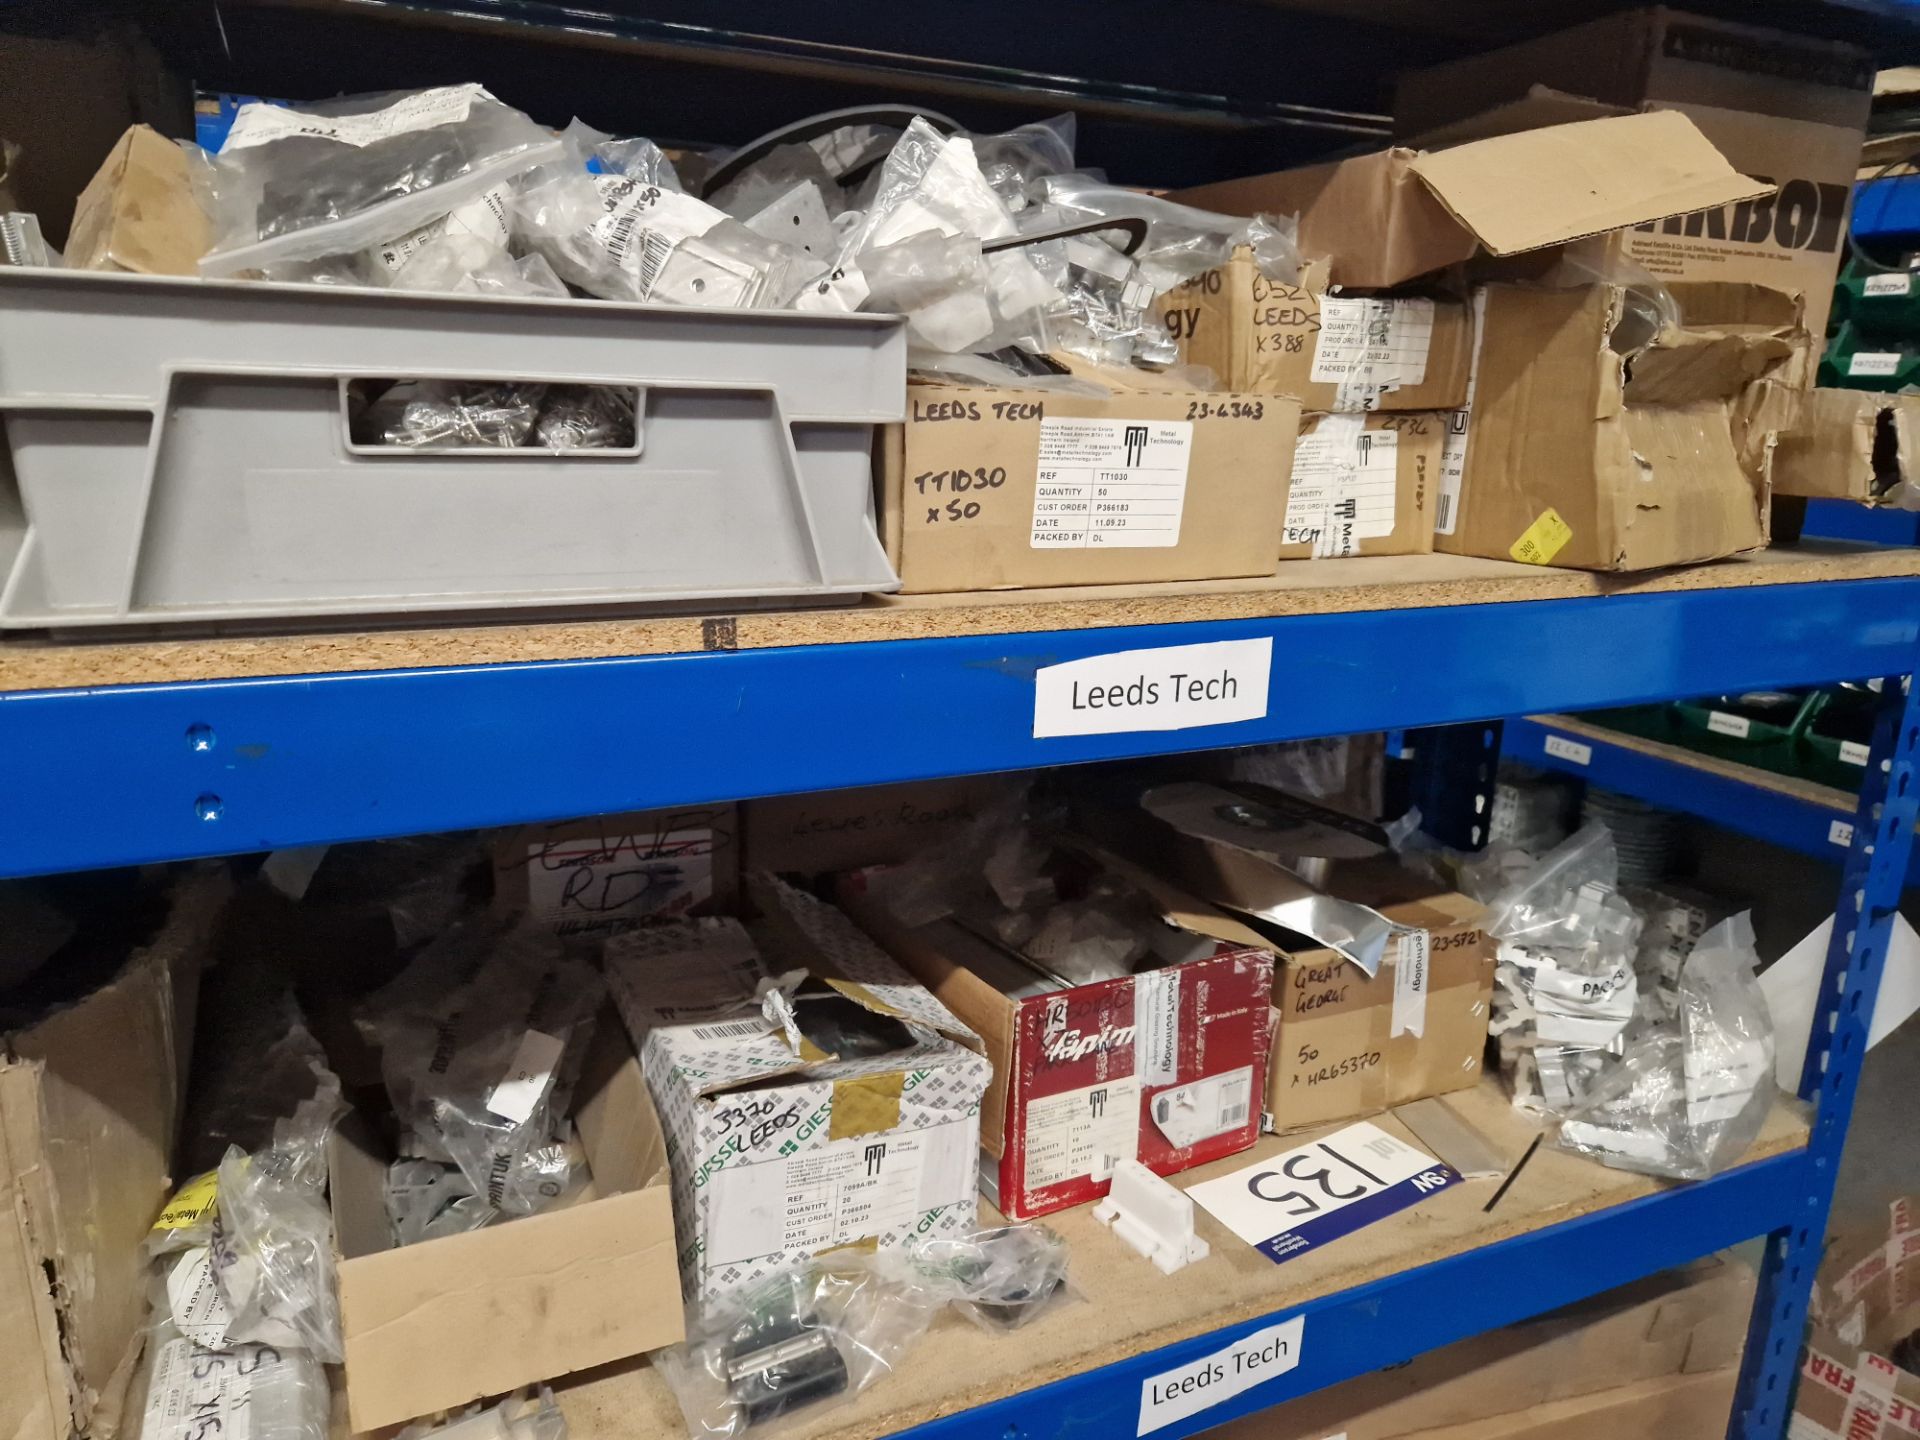 Contents to Four Bays of Shelving, including Rubber Gaskets, Aluminium Profile, End Caps, Screws, - Image 7 of 13